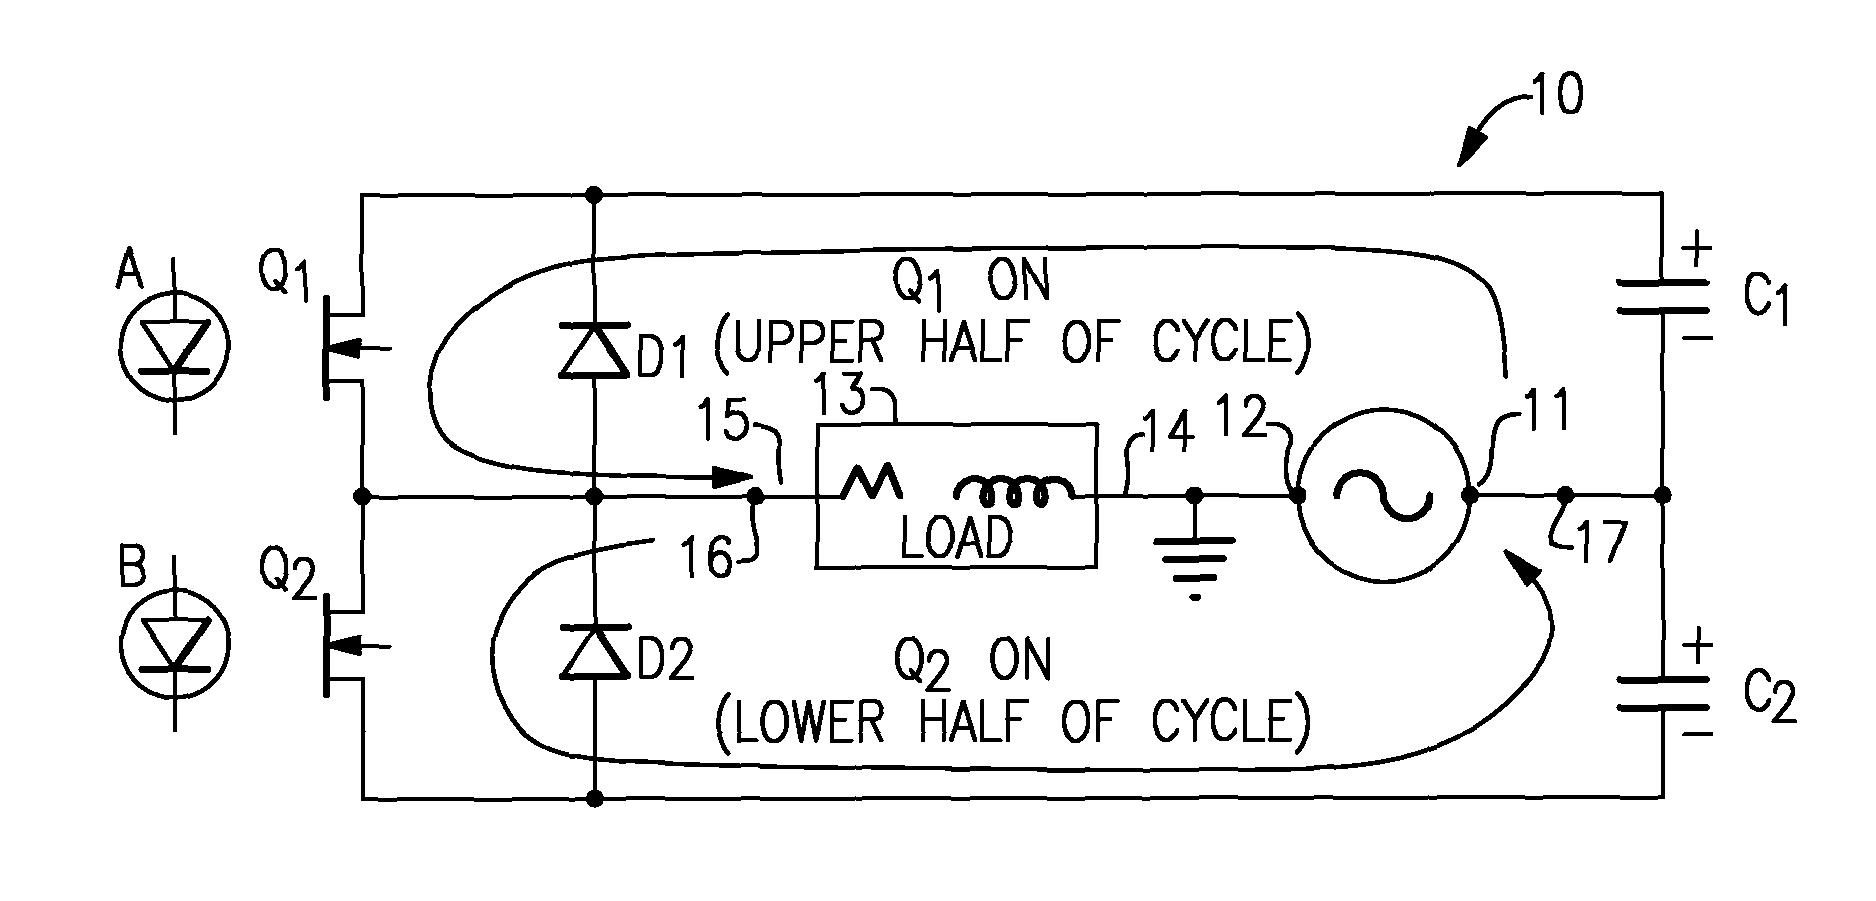 AC line voltage conditioner and controller